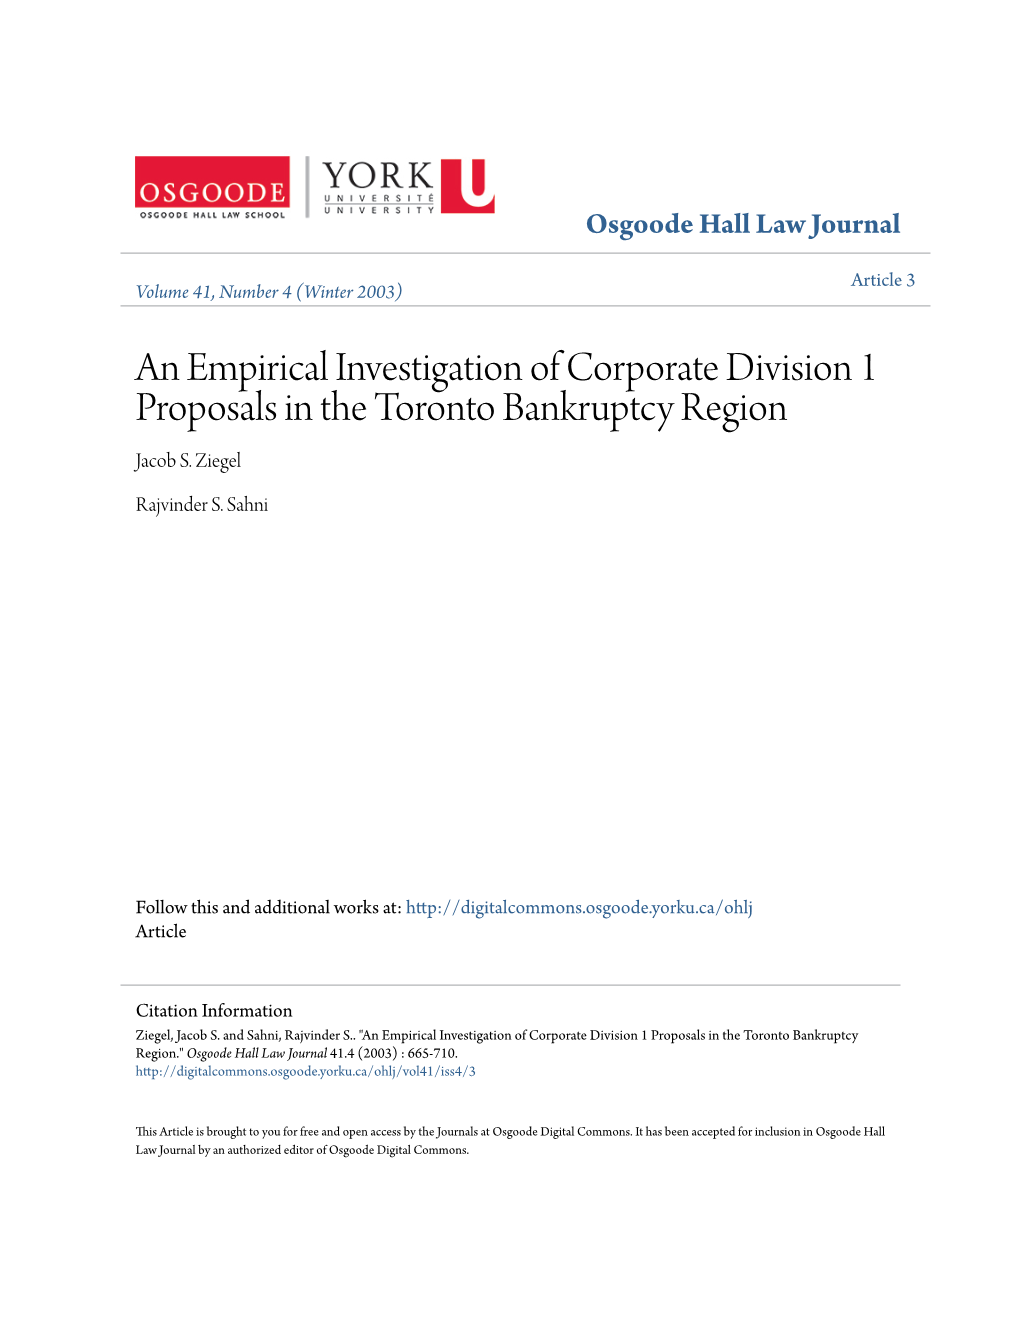 An Empirical Investigation of Corporate Division 1 Proposals in the Toronto Bankruptcy Region Jacob S